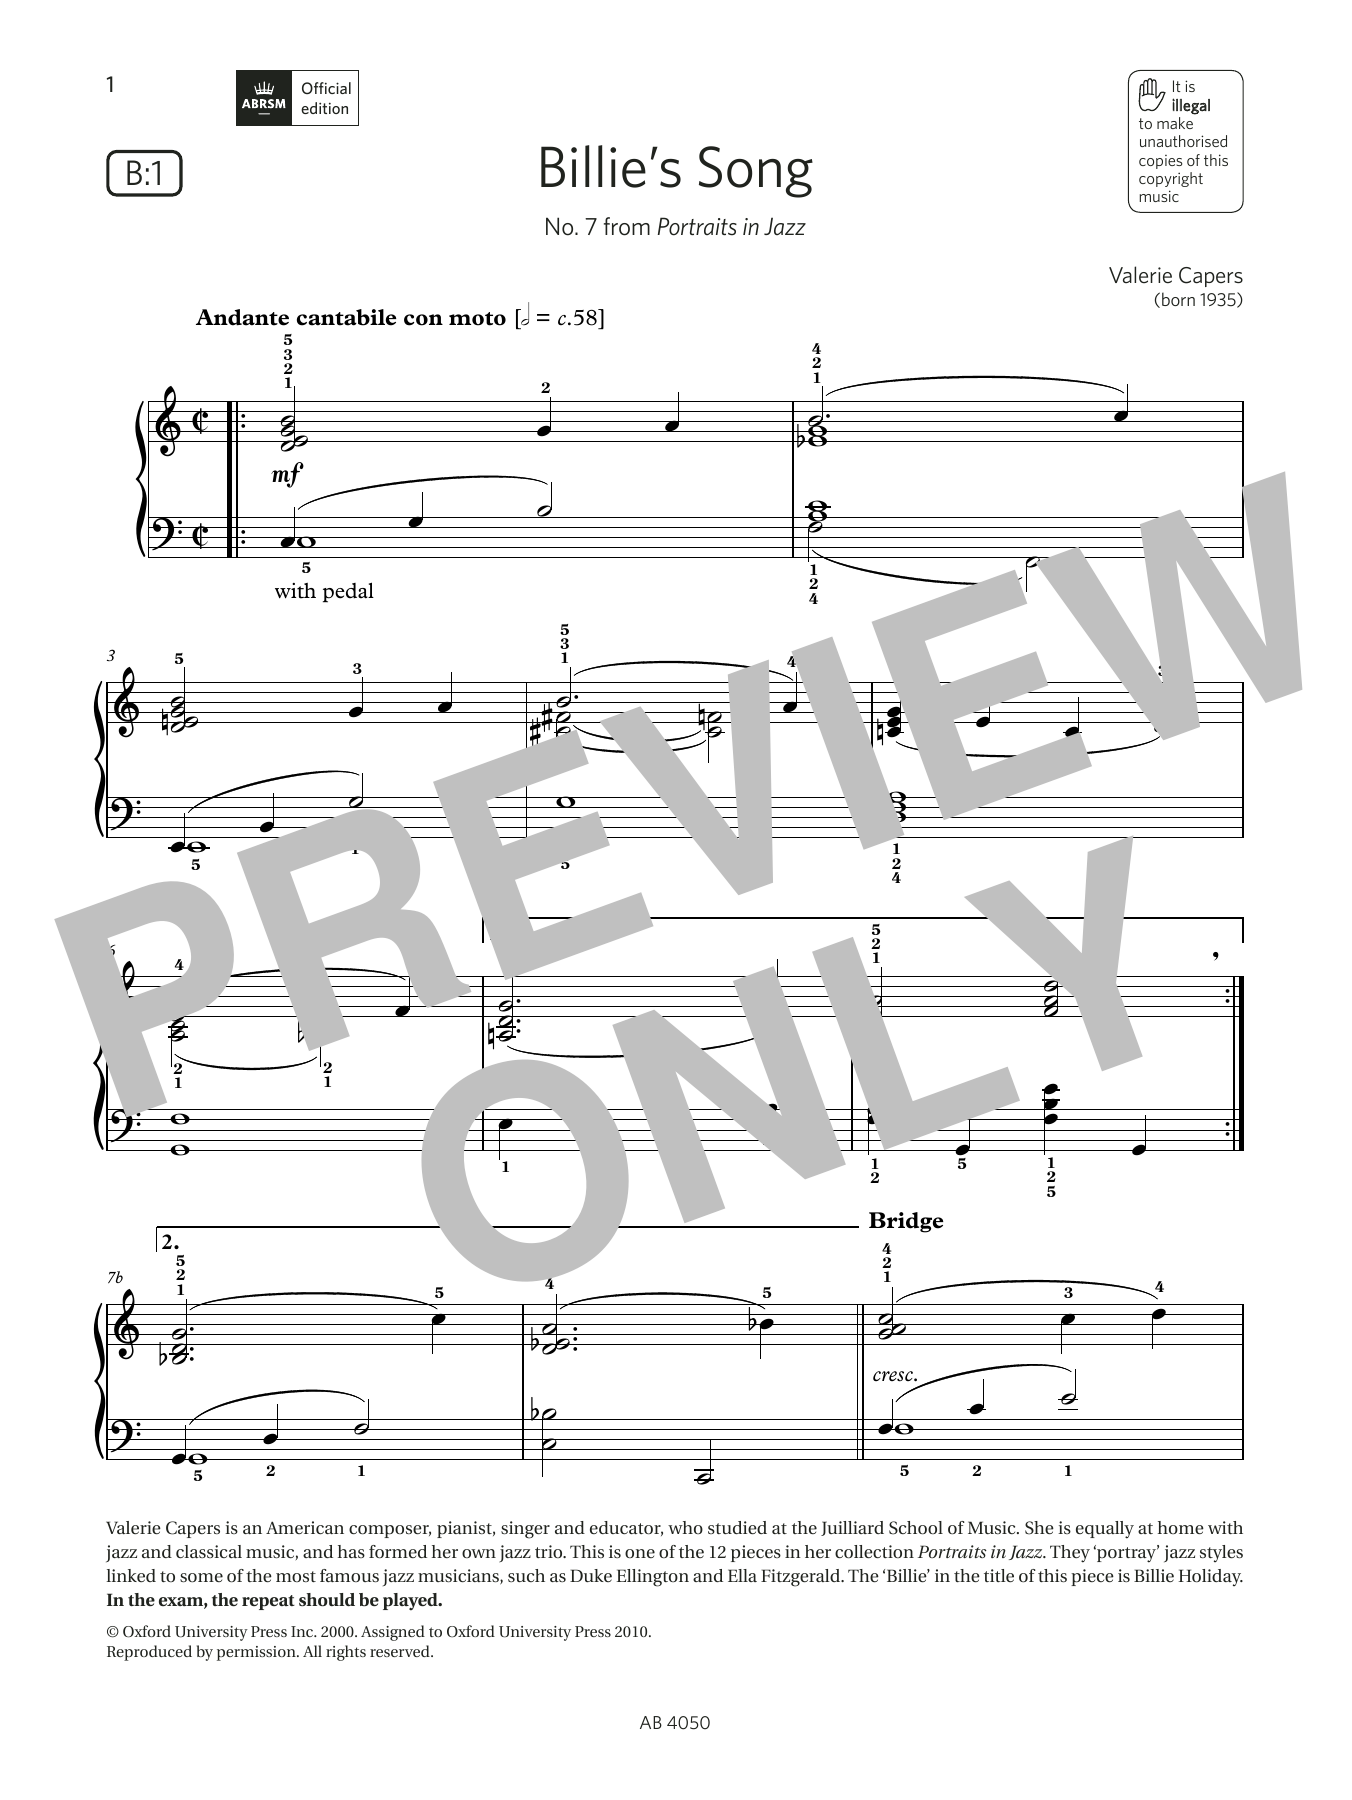 Download Valerie Capers Billie's Song (Grade 4, list B1, from t Sheet Music